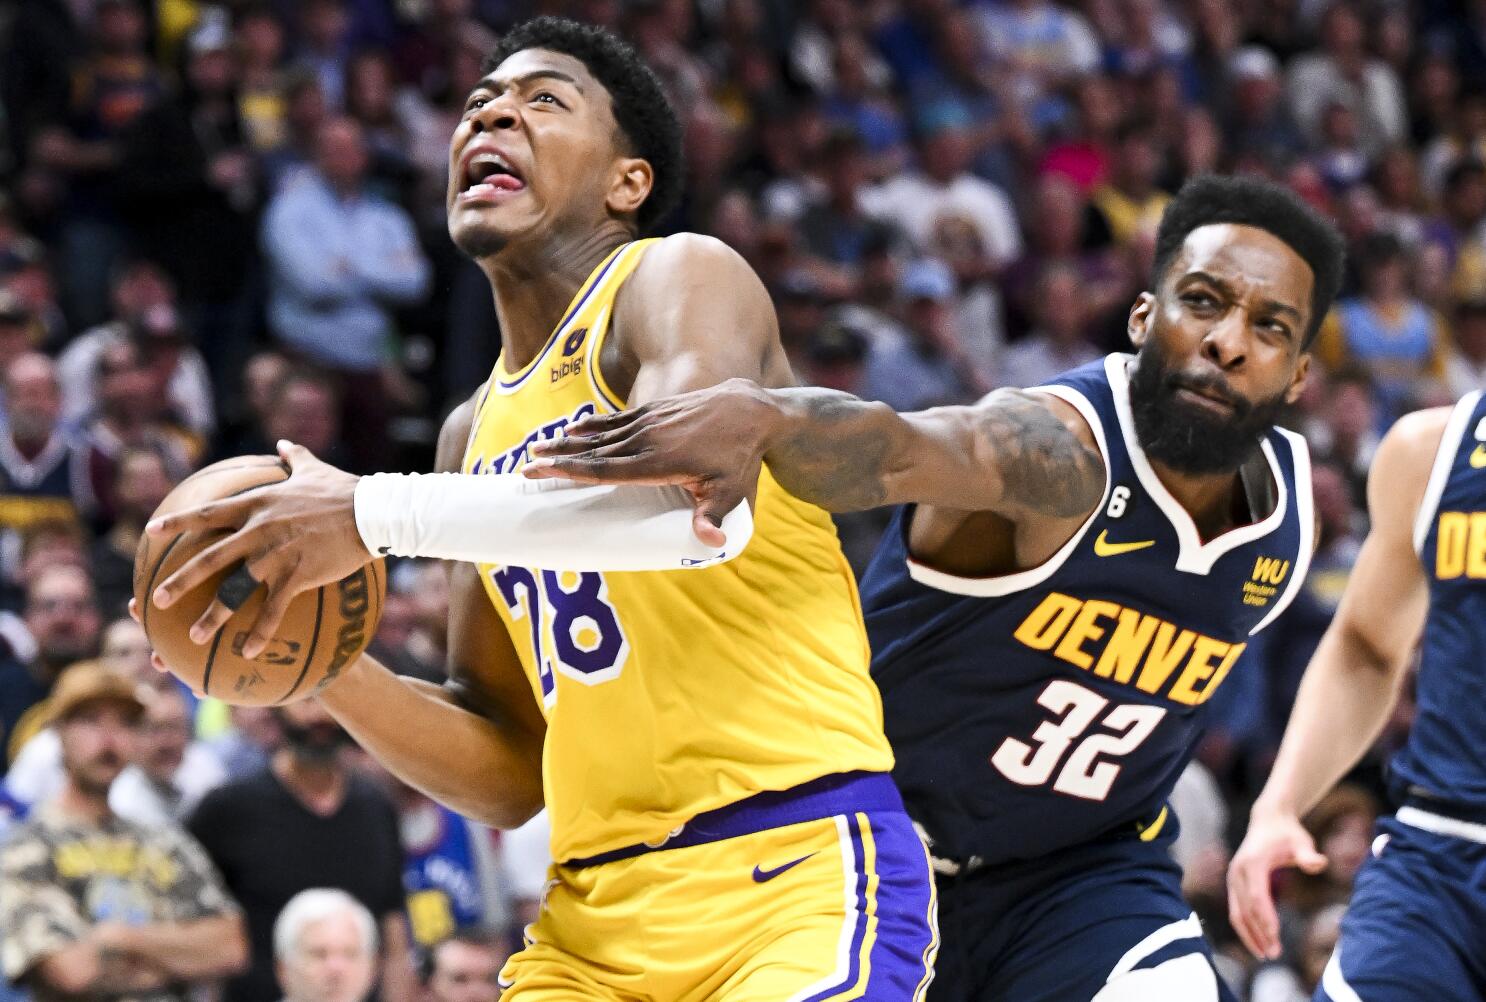 The 3 Point Conversion - The Los Angeles Lakers are resigning forward Rui  Hachimura to a three-year $51 million deal #NBAFreeAgency #LakeShow  #3ptcnvrsn